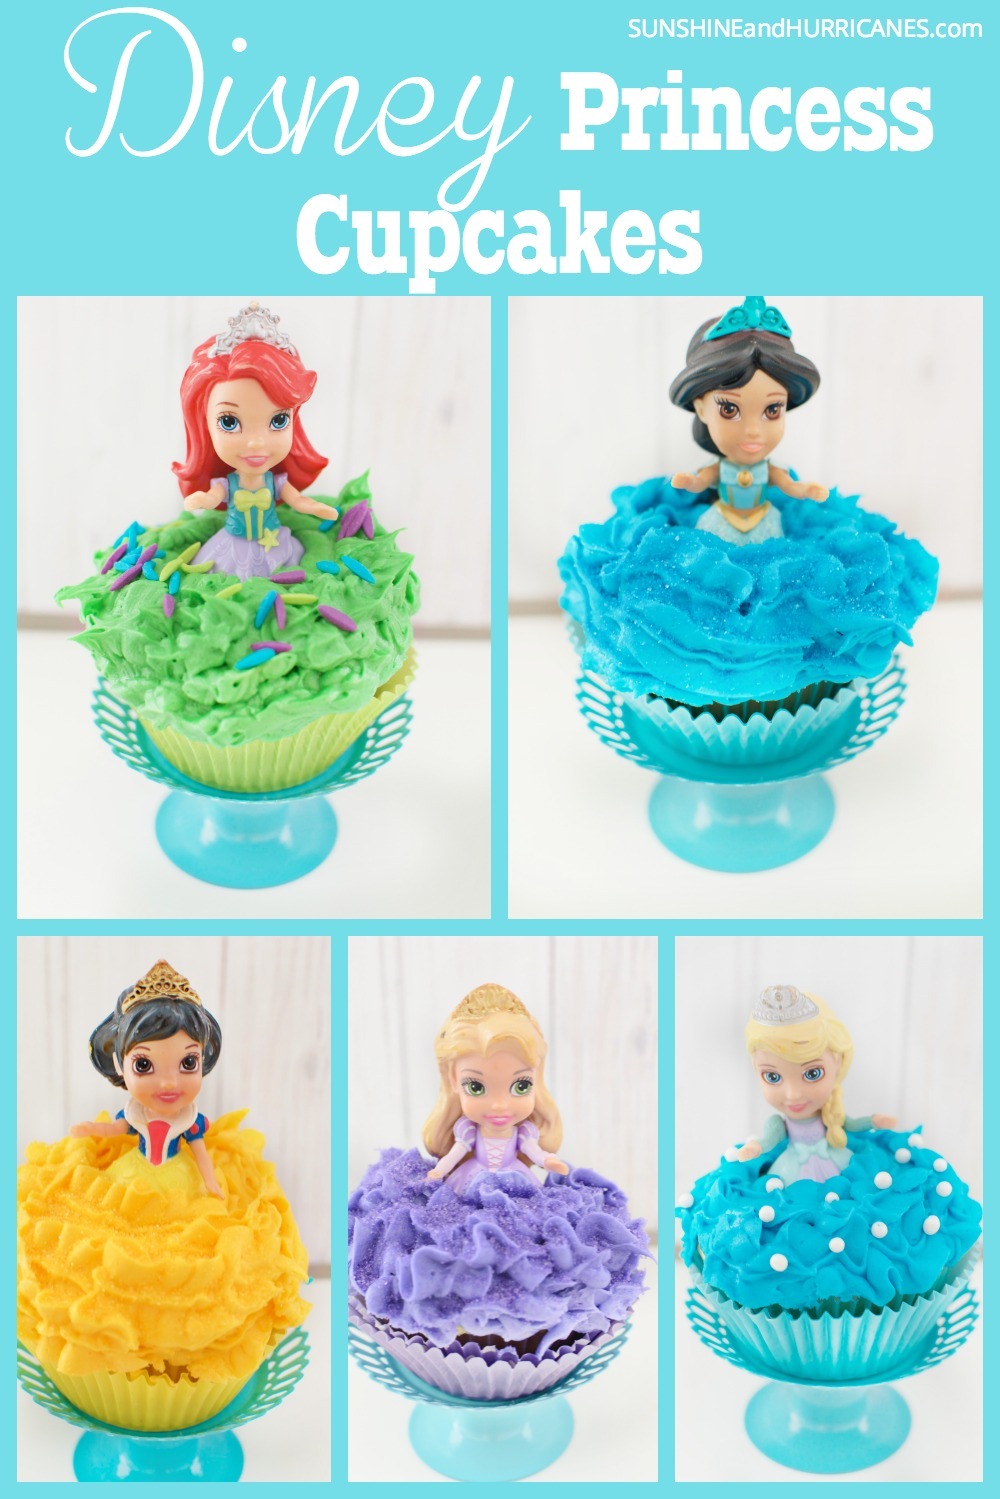 Looking for an easy way to create a big WOW for a Disney Princess Party? These Disney cupcakes, featuring five different princess cupcakes are adorable and the perfect sweet treat for any little girl's birthday party. Disney cupcakes - Disney Princess Cupcake at SunshineandHurricanes.com